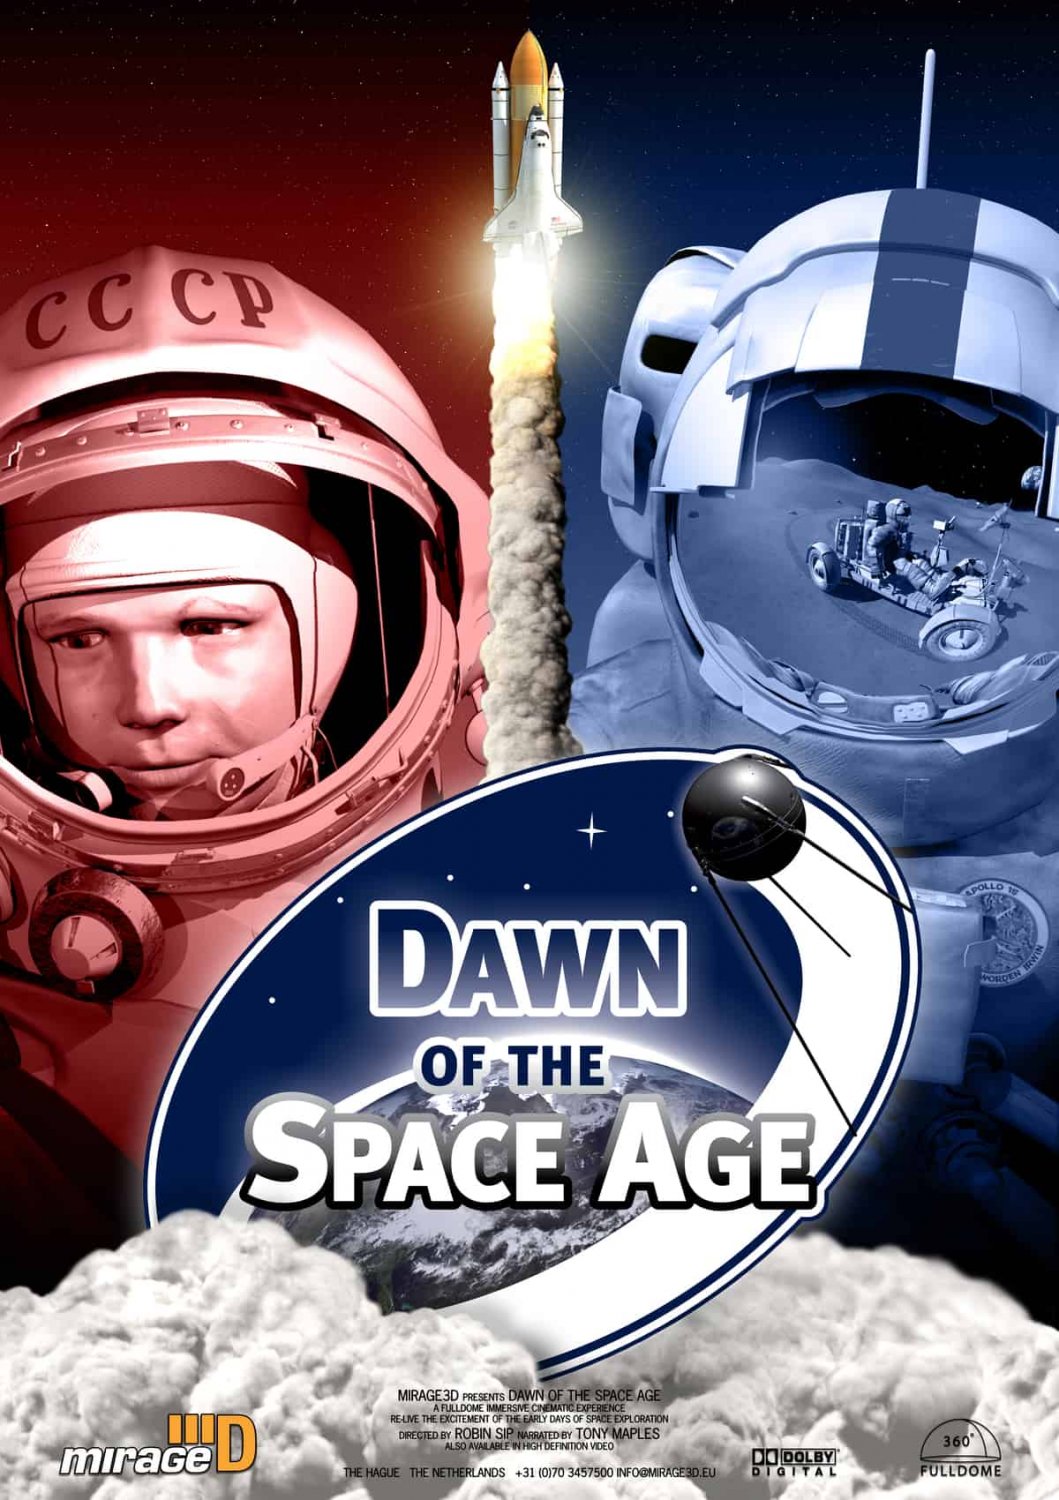 poster_dawn_of_the_space_age.jpg